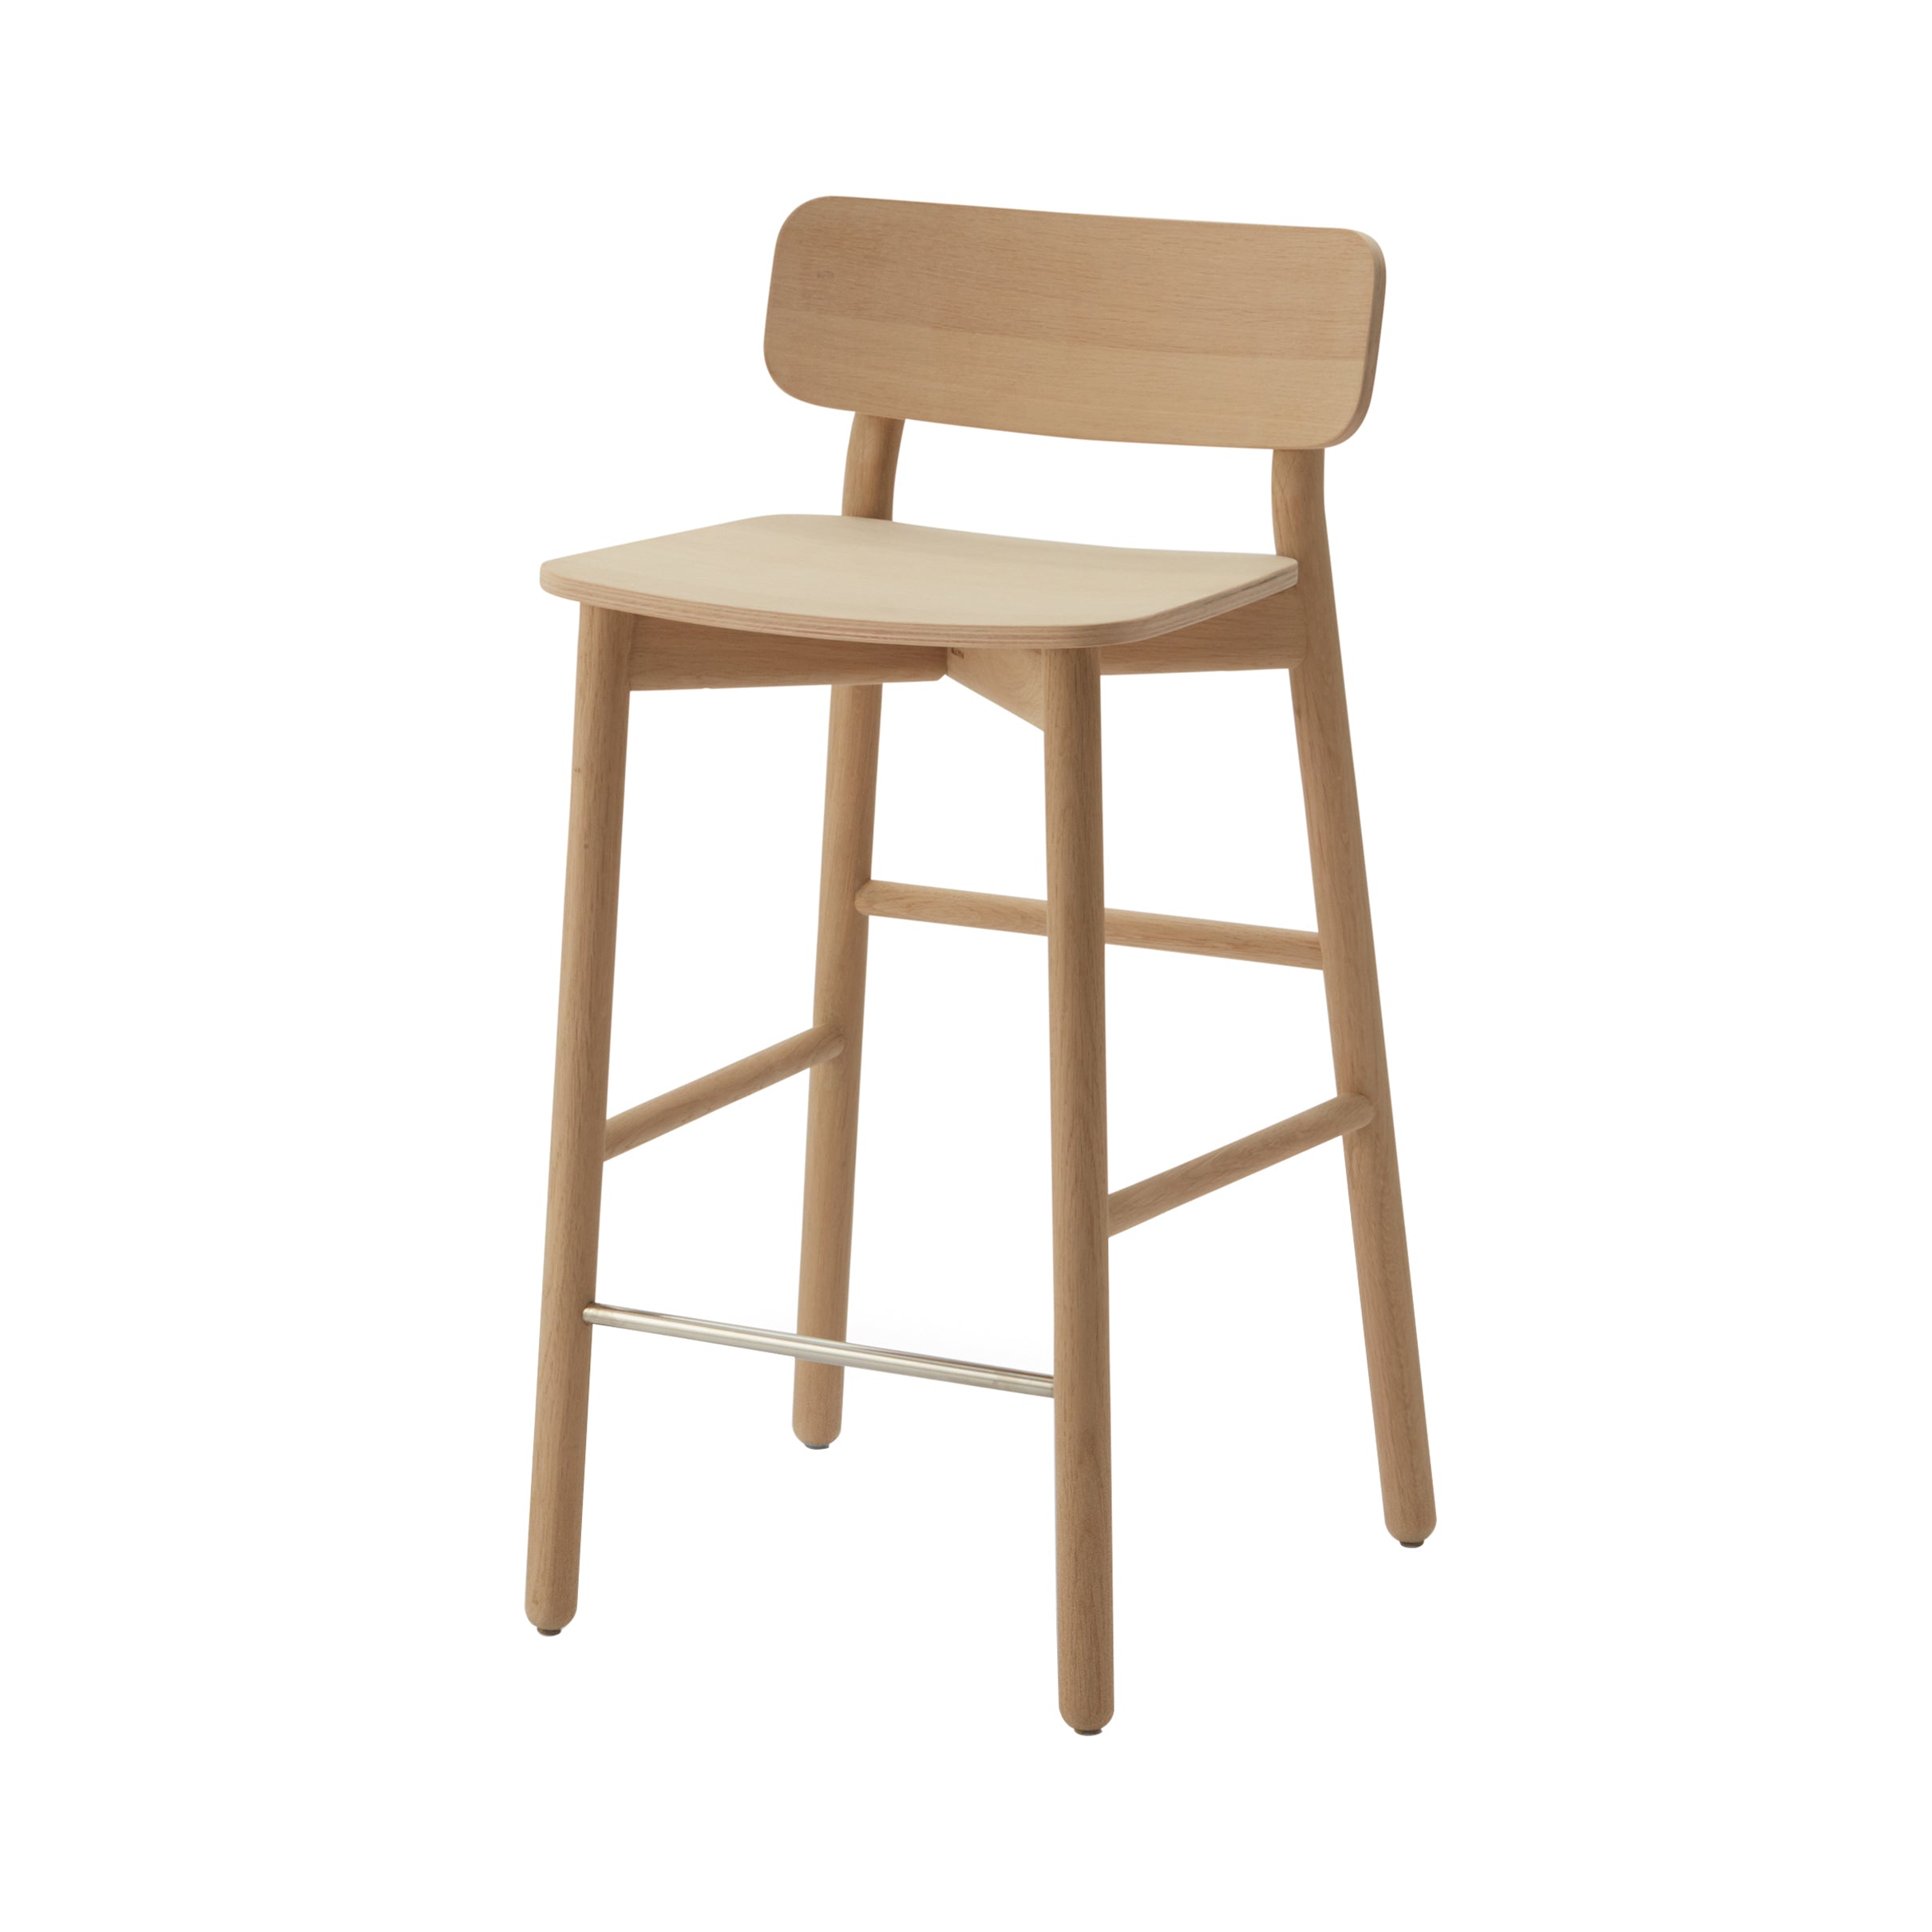 Hven Bar Stool: Stainless Steel Oak + Without Cushion